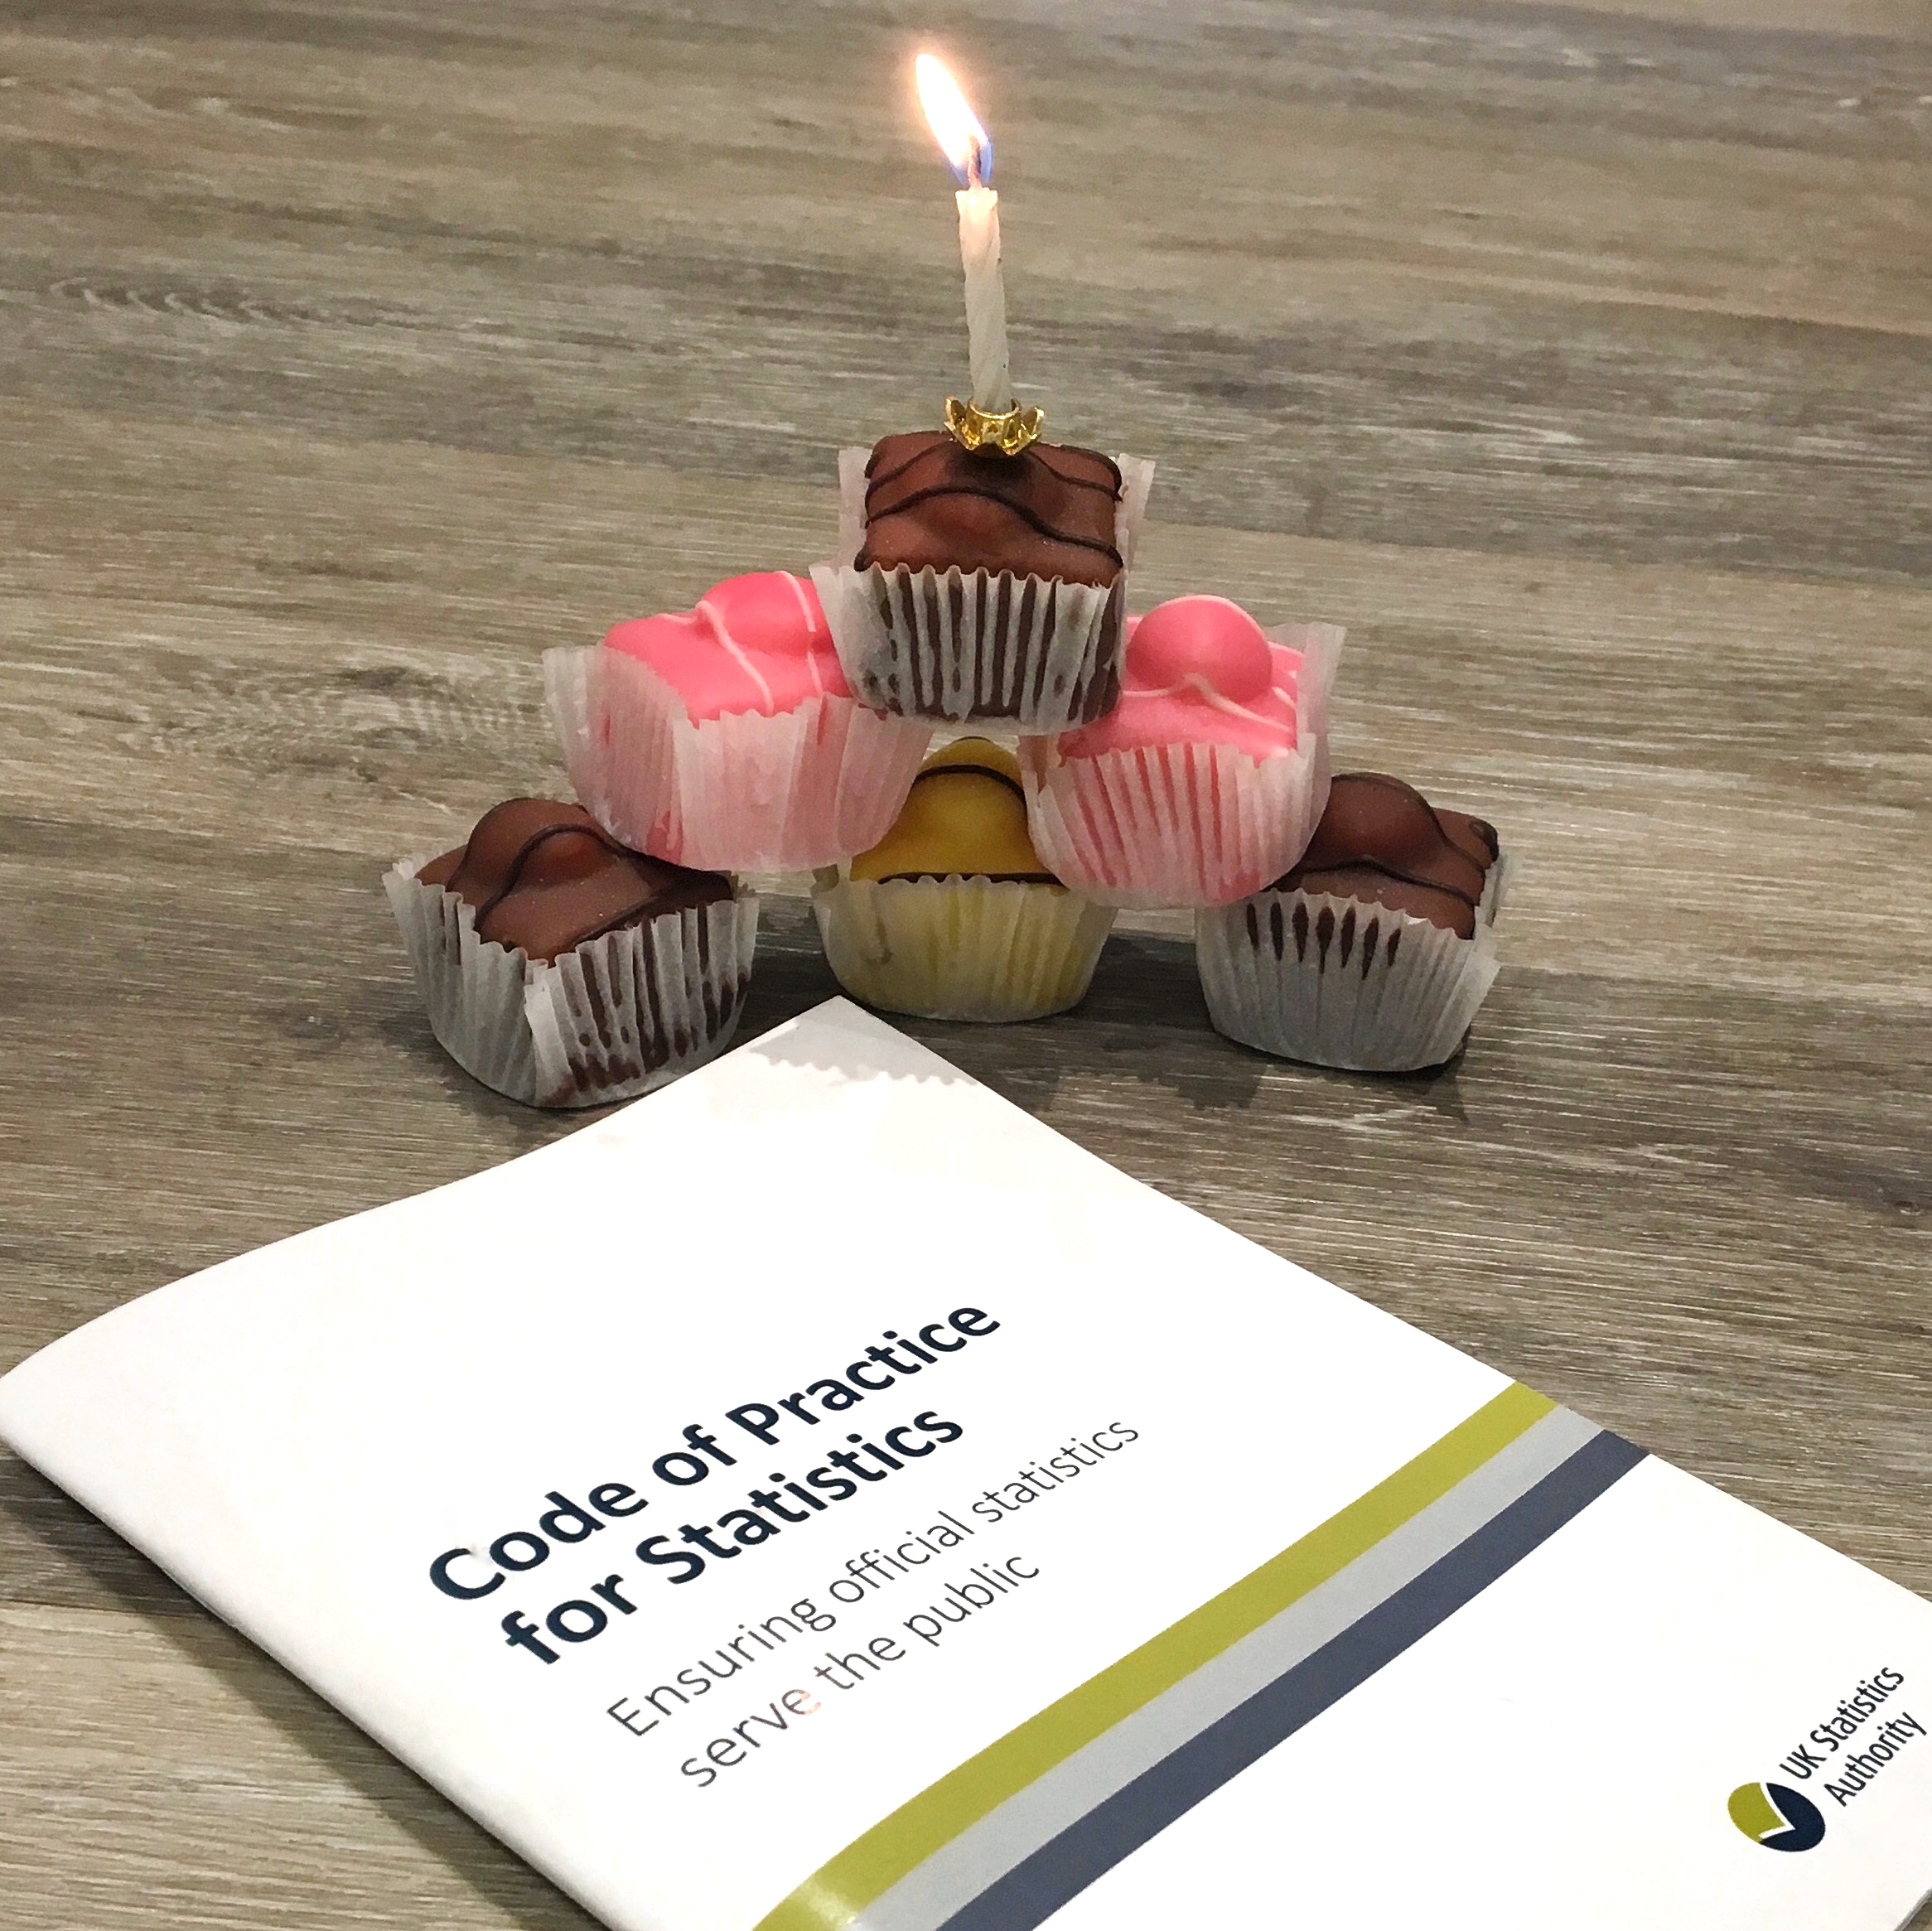 A copy of the code of practice for statistics next to a stack of small cakes with a candle on the top